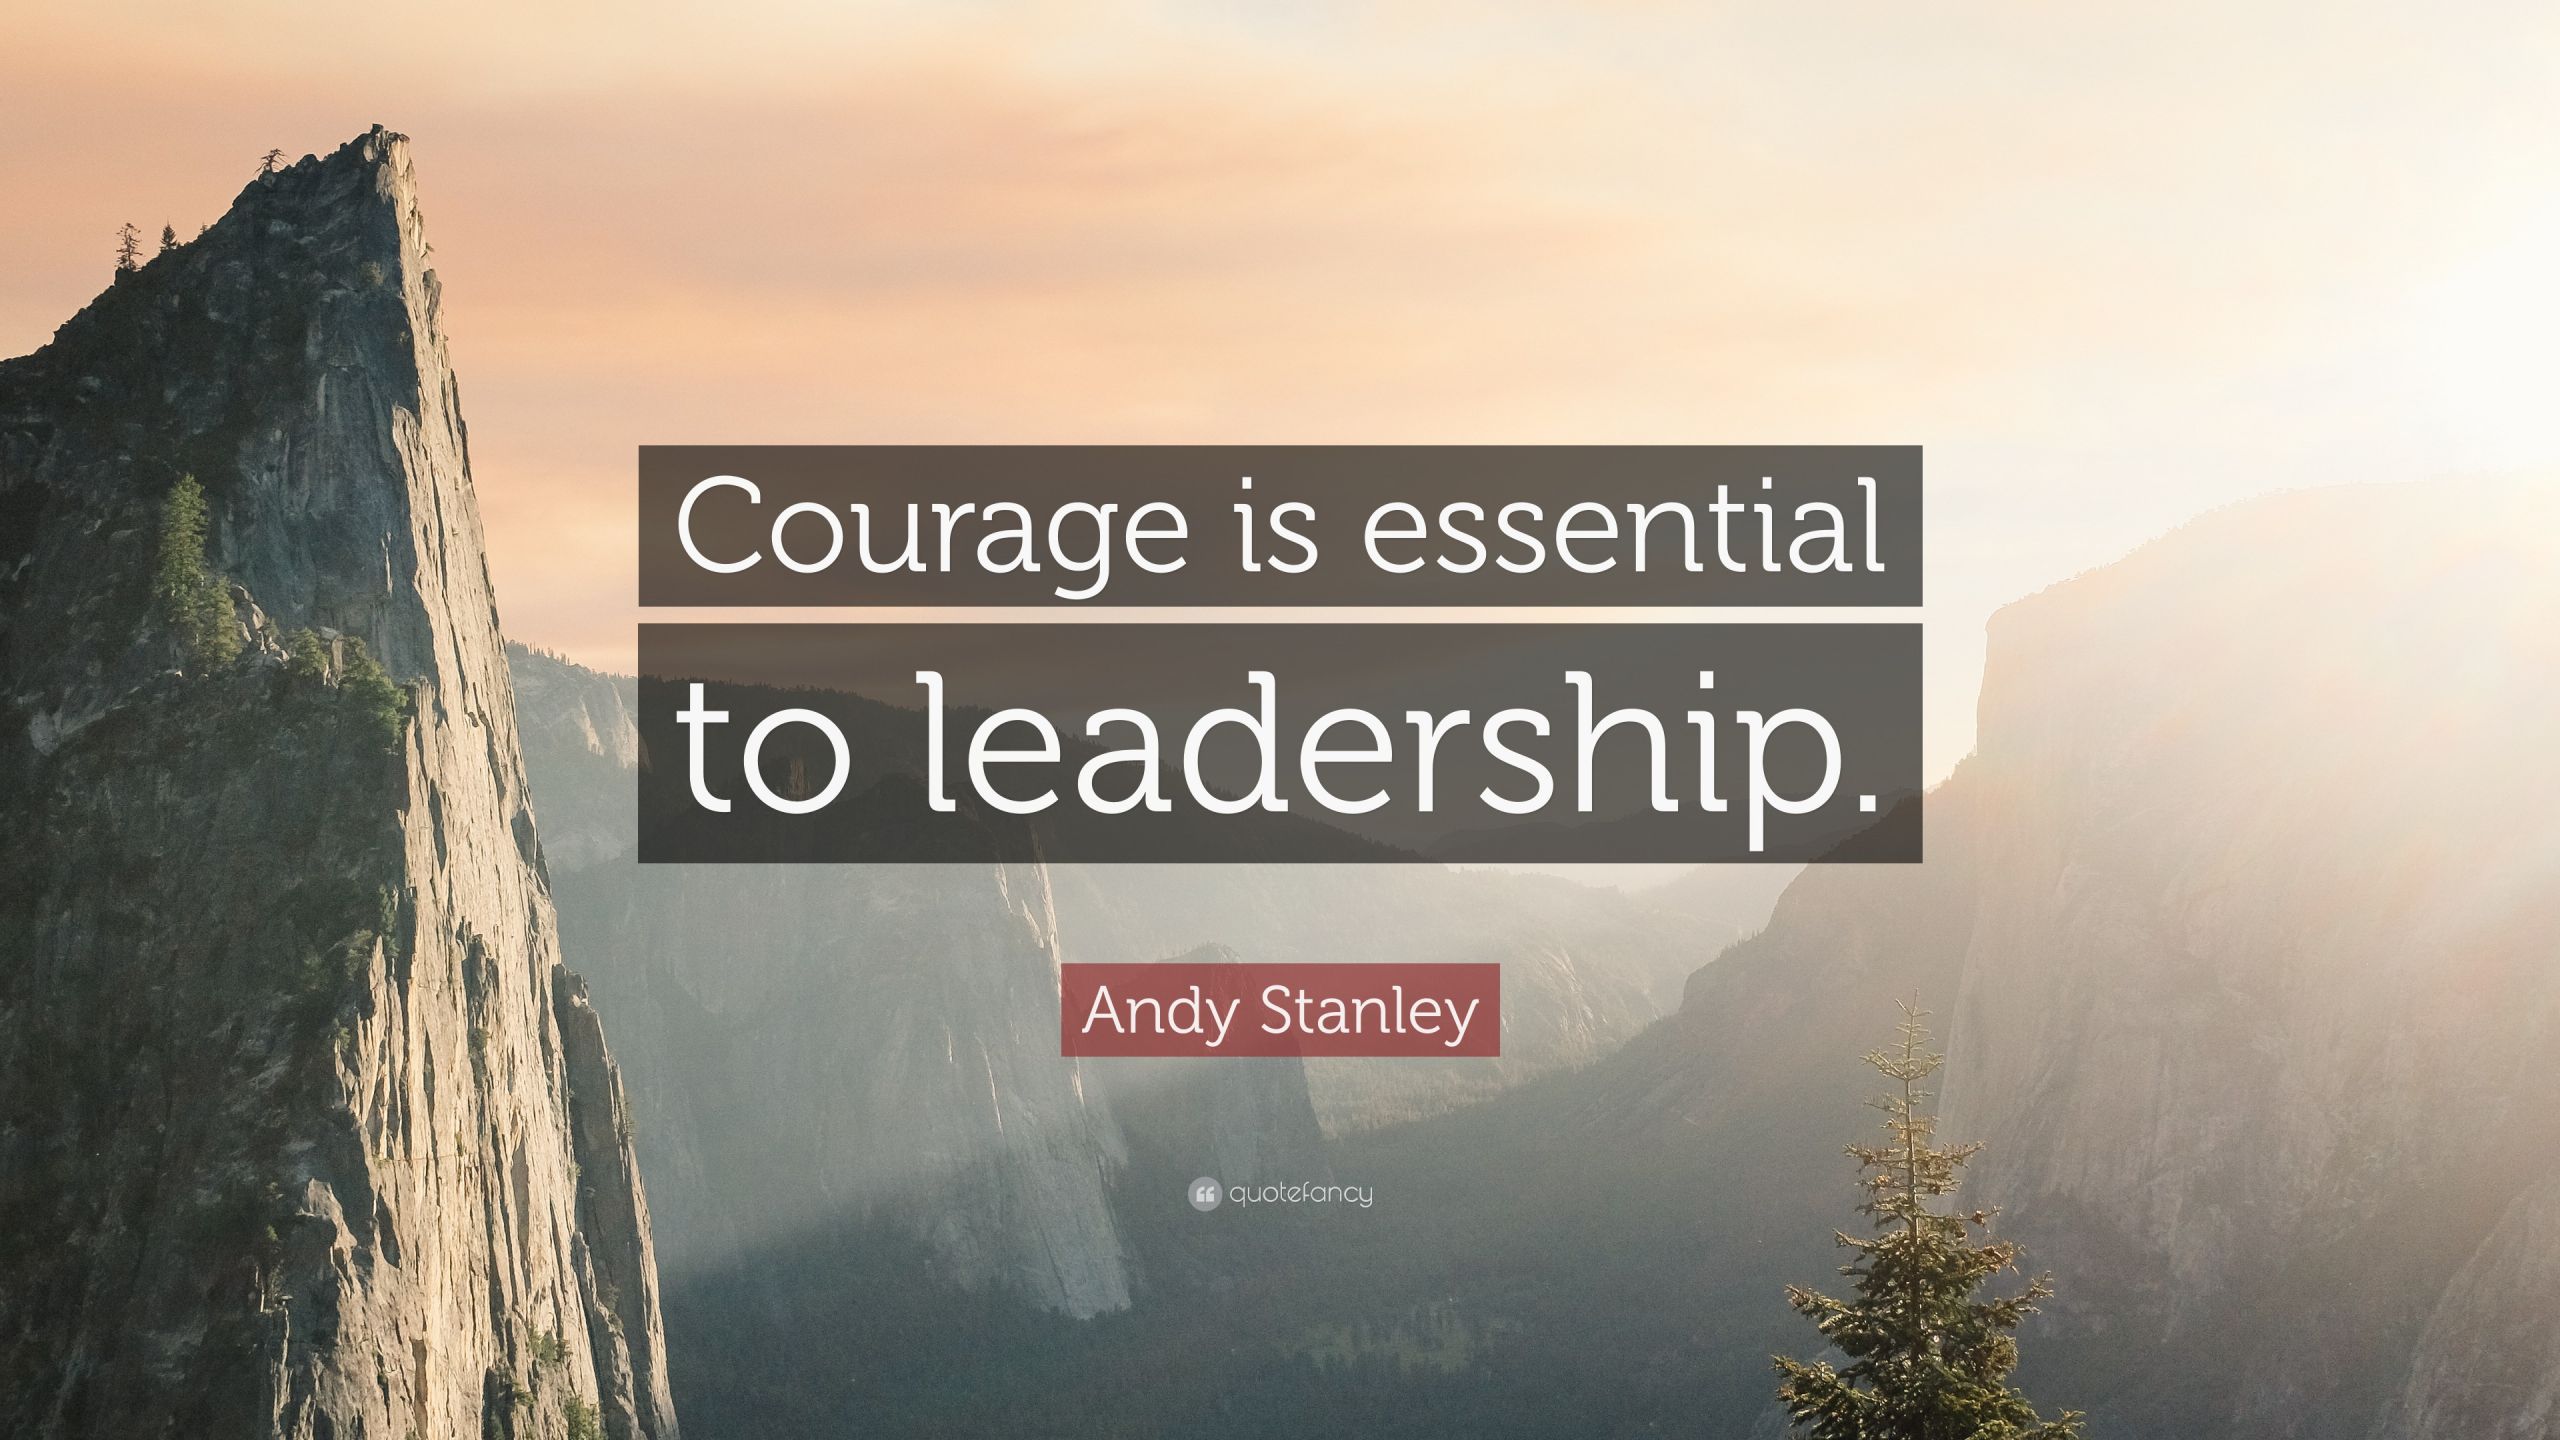 Andy Stanley Leadership Quotes
 Andy Stanley Quote “Courage is essential to leadership